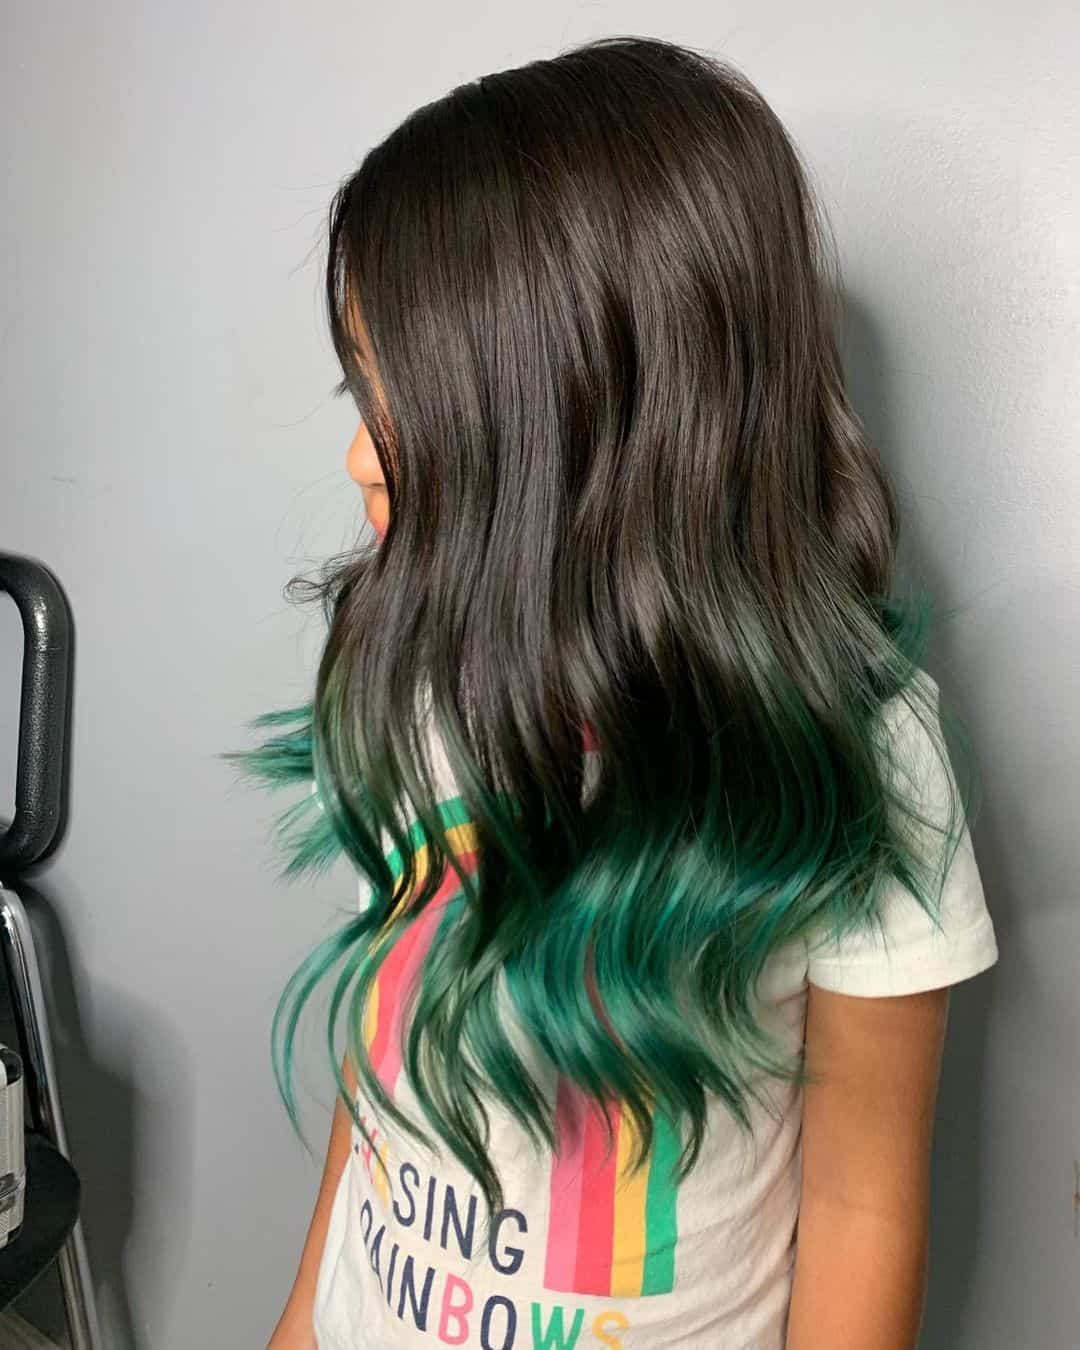 Top 40 Unique Ombre Hair Color Ideas(Blond, Black, Brown And Colorful) -  Tattooed Martha